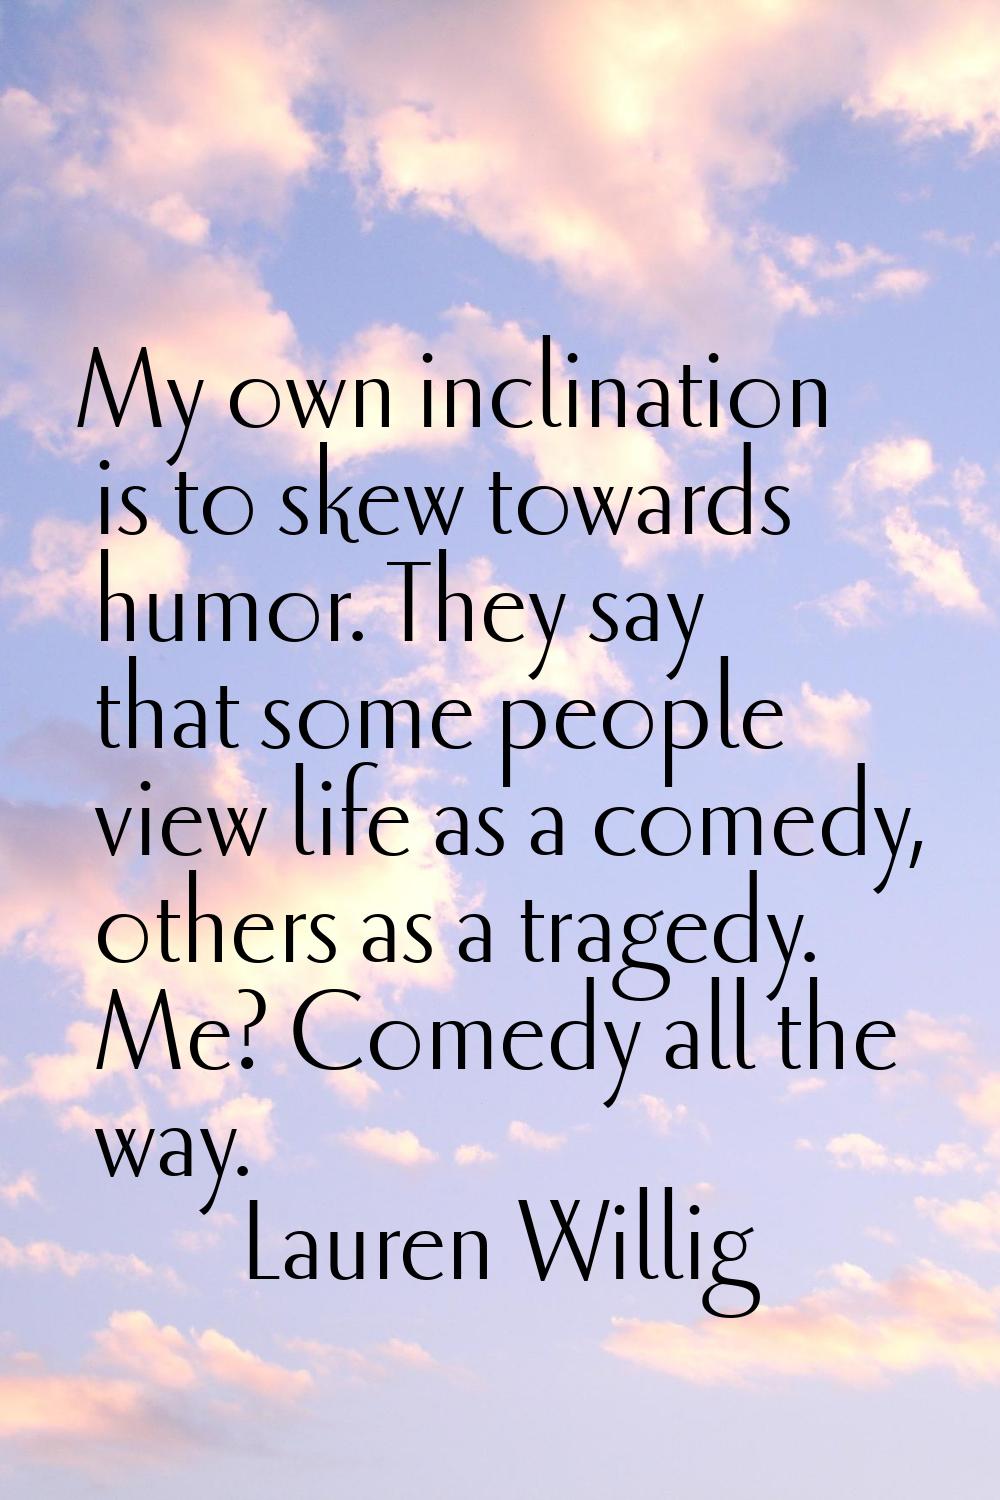 My own inclination is to skew towards humor. They say that some people view life as a comedy, other